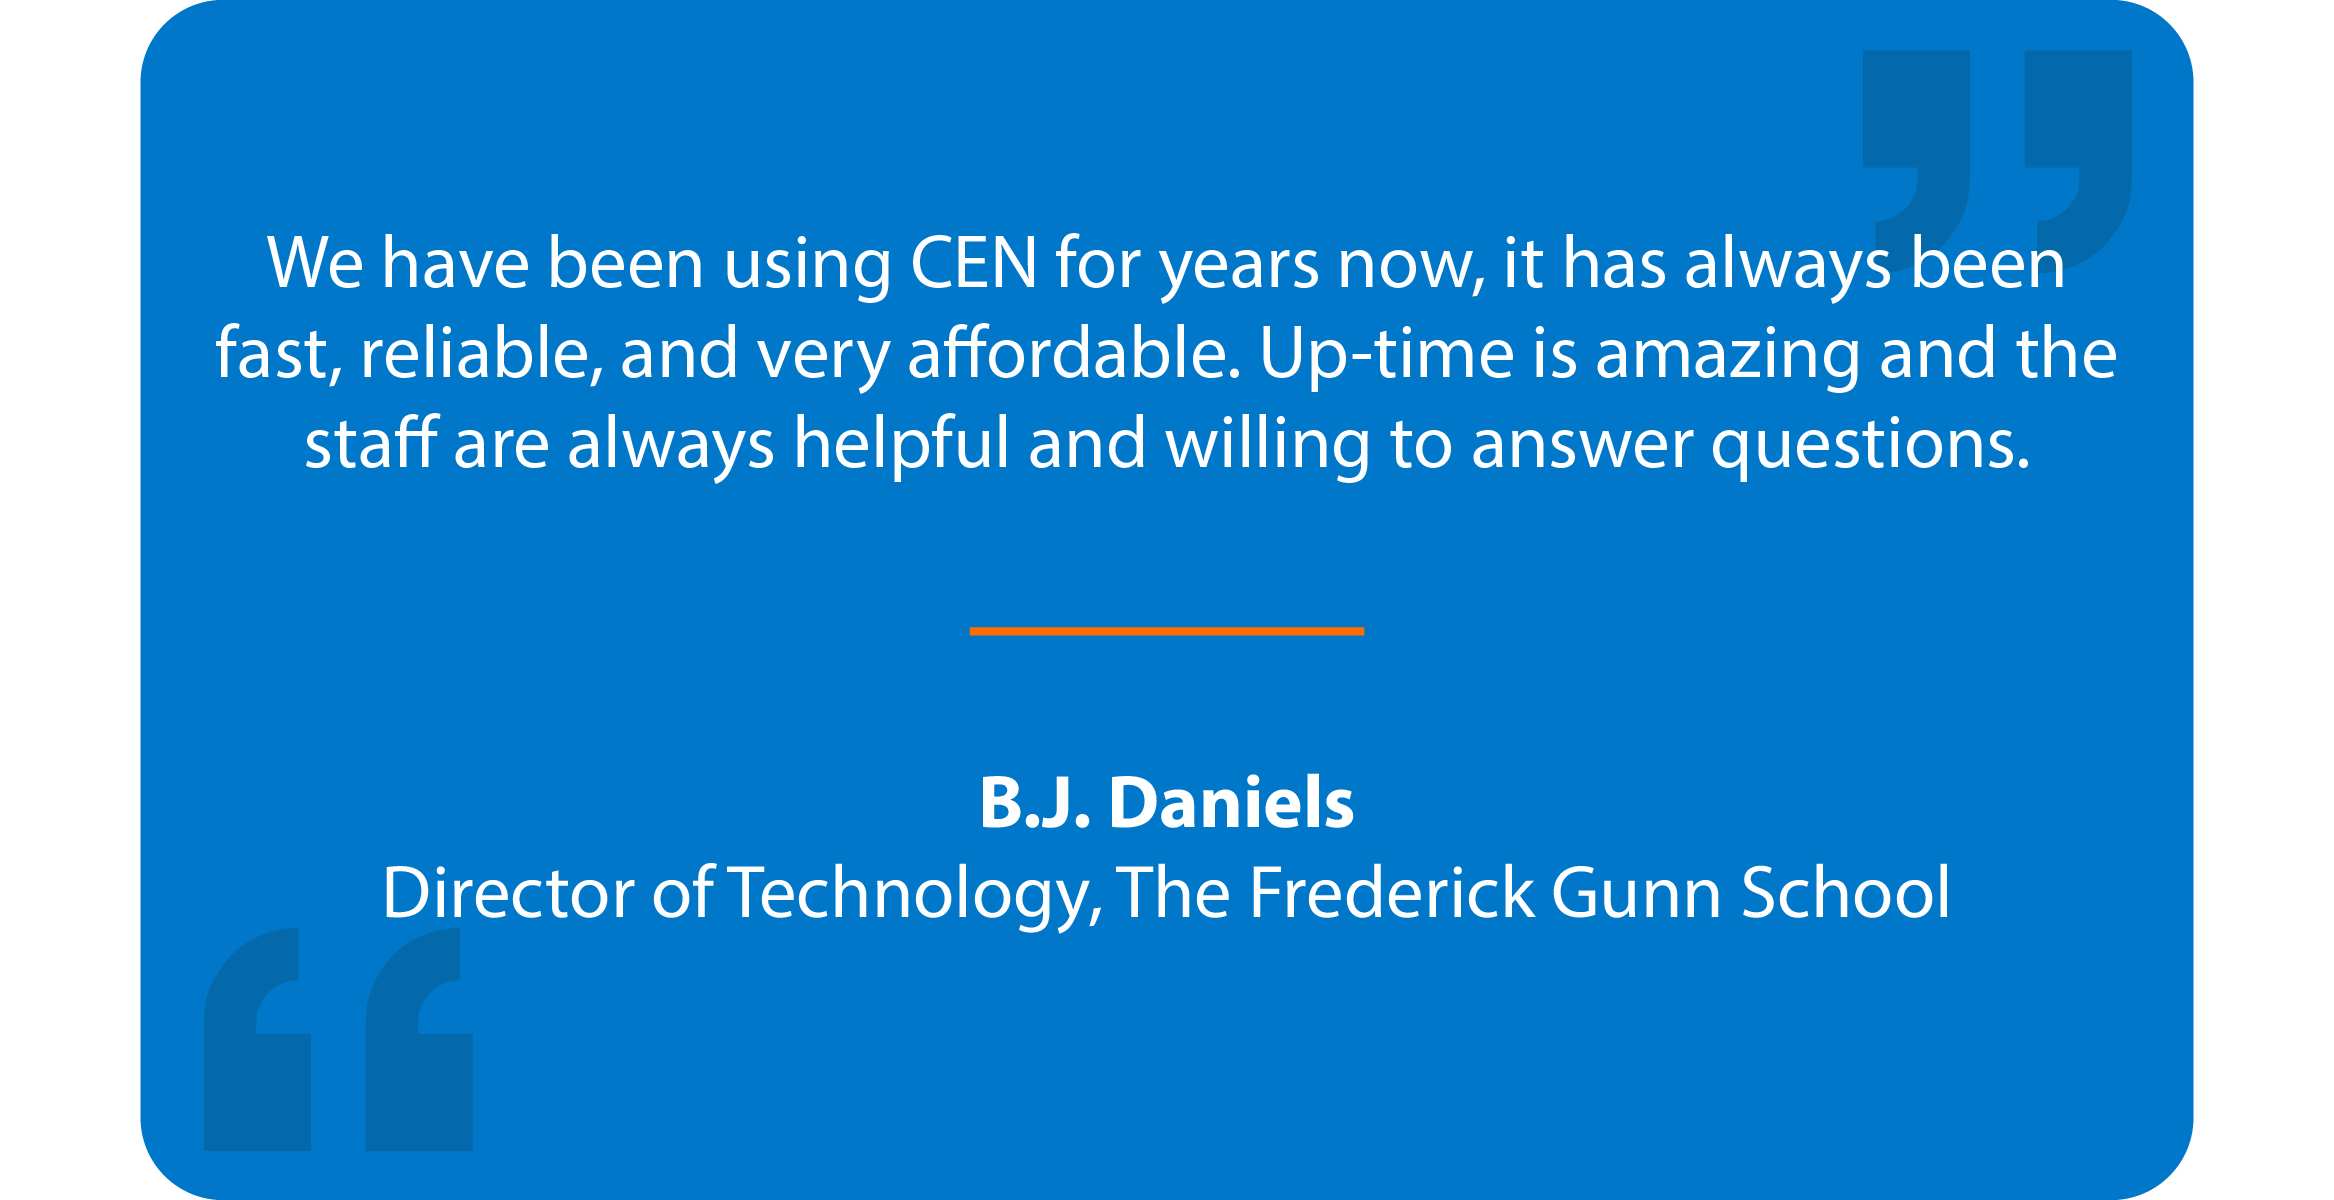 Blue box with quote that reads: We have been using CEN for years now, it has always been fast, reliable, and very affordable. Up-time is amazing and the staff are always helpful and willing to answer questions. B.J. Daniels Director of Technology, The Gunnery School